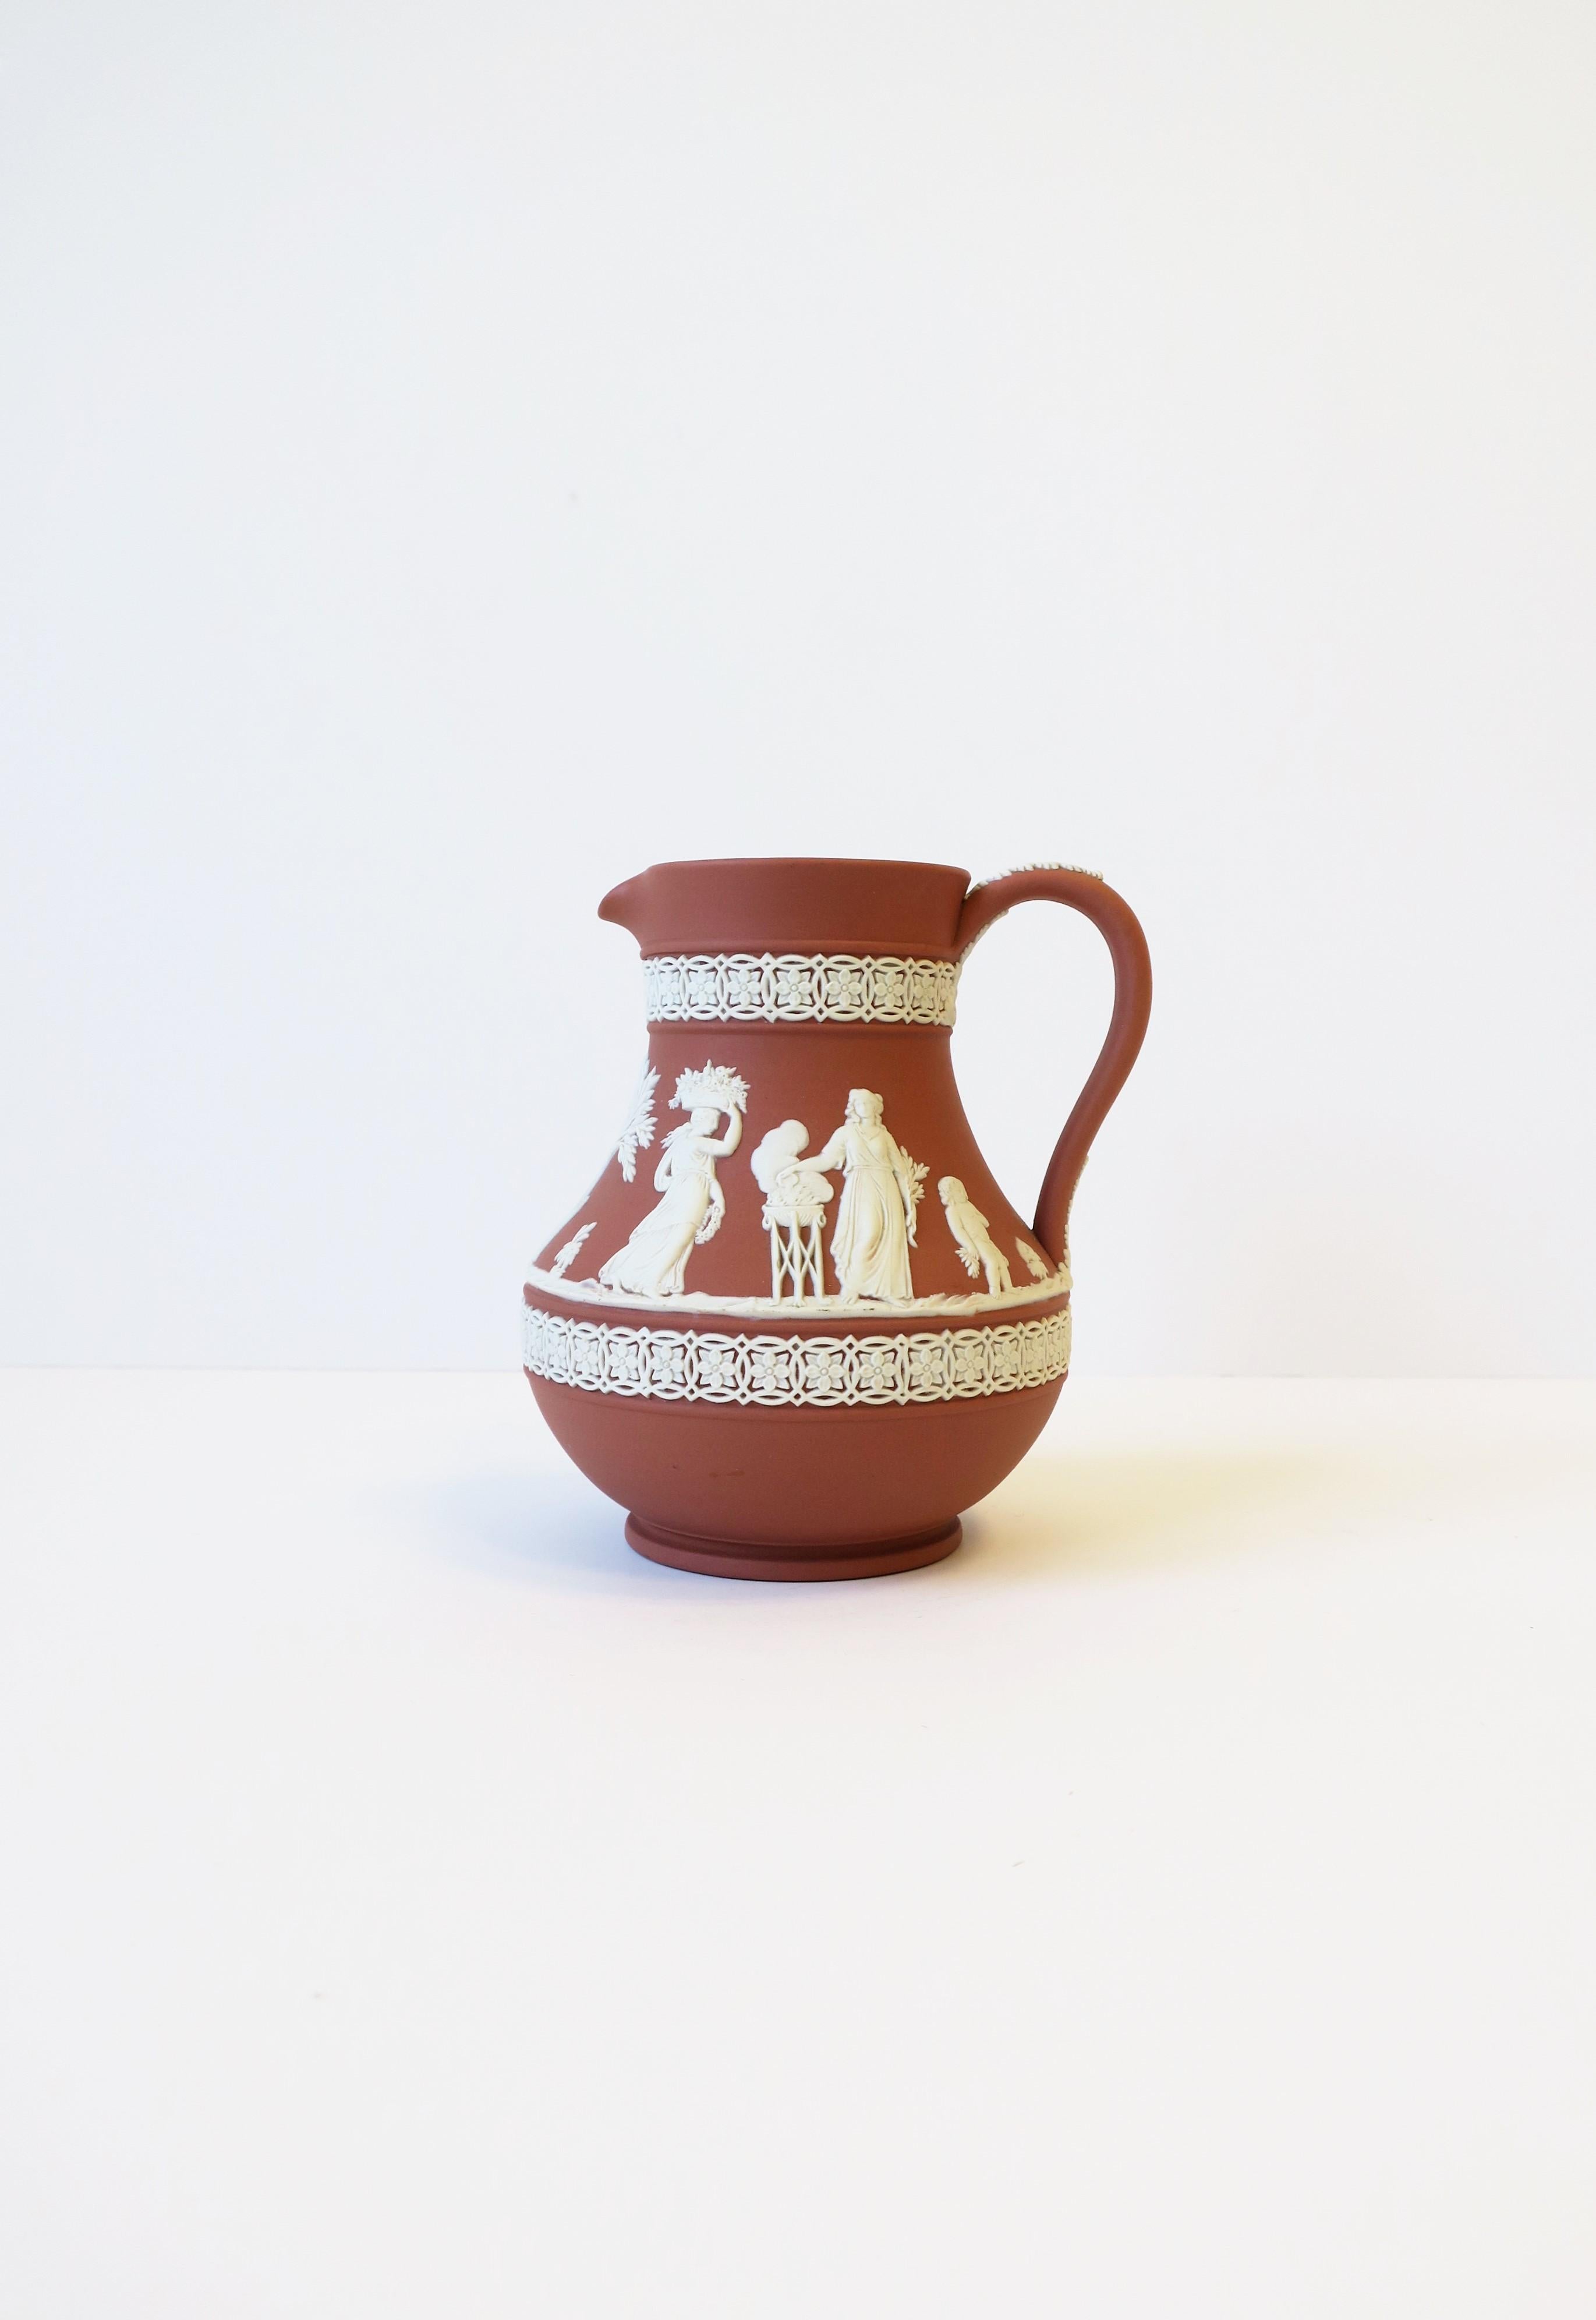 A beautiful and substantial mid-20th century English Wedgwood Jasperware terracotta and white stoneware pitcher in the Neoclassical design style, 1959, England. Piece has a beautiful raised white Neoclassical relief around pitcher's center, a white